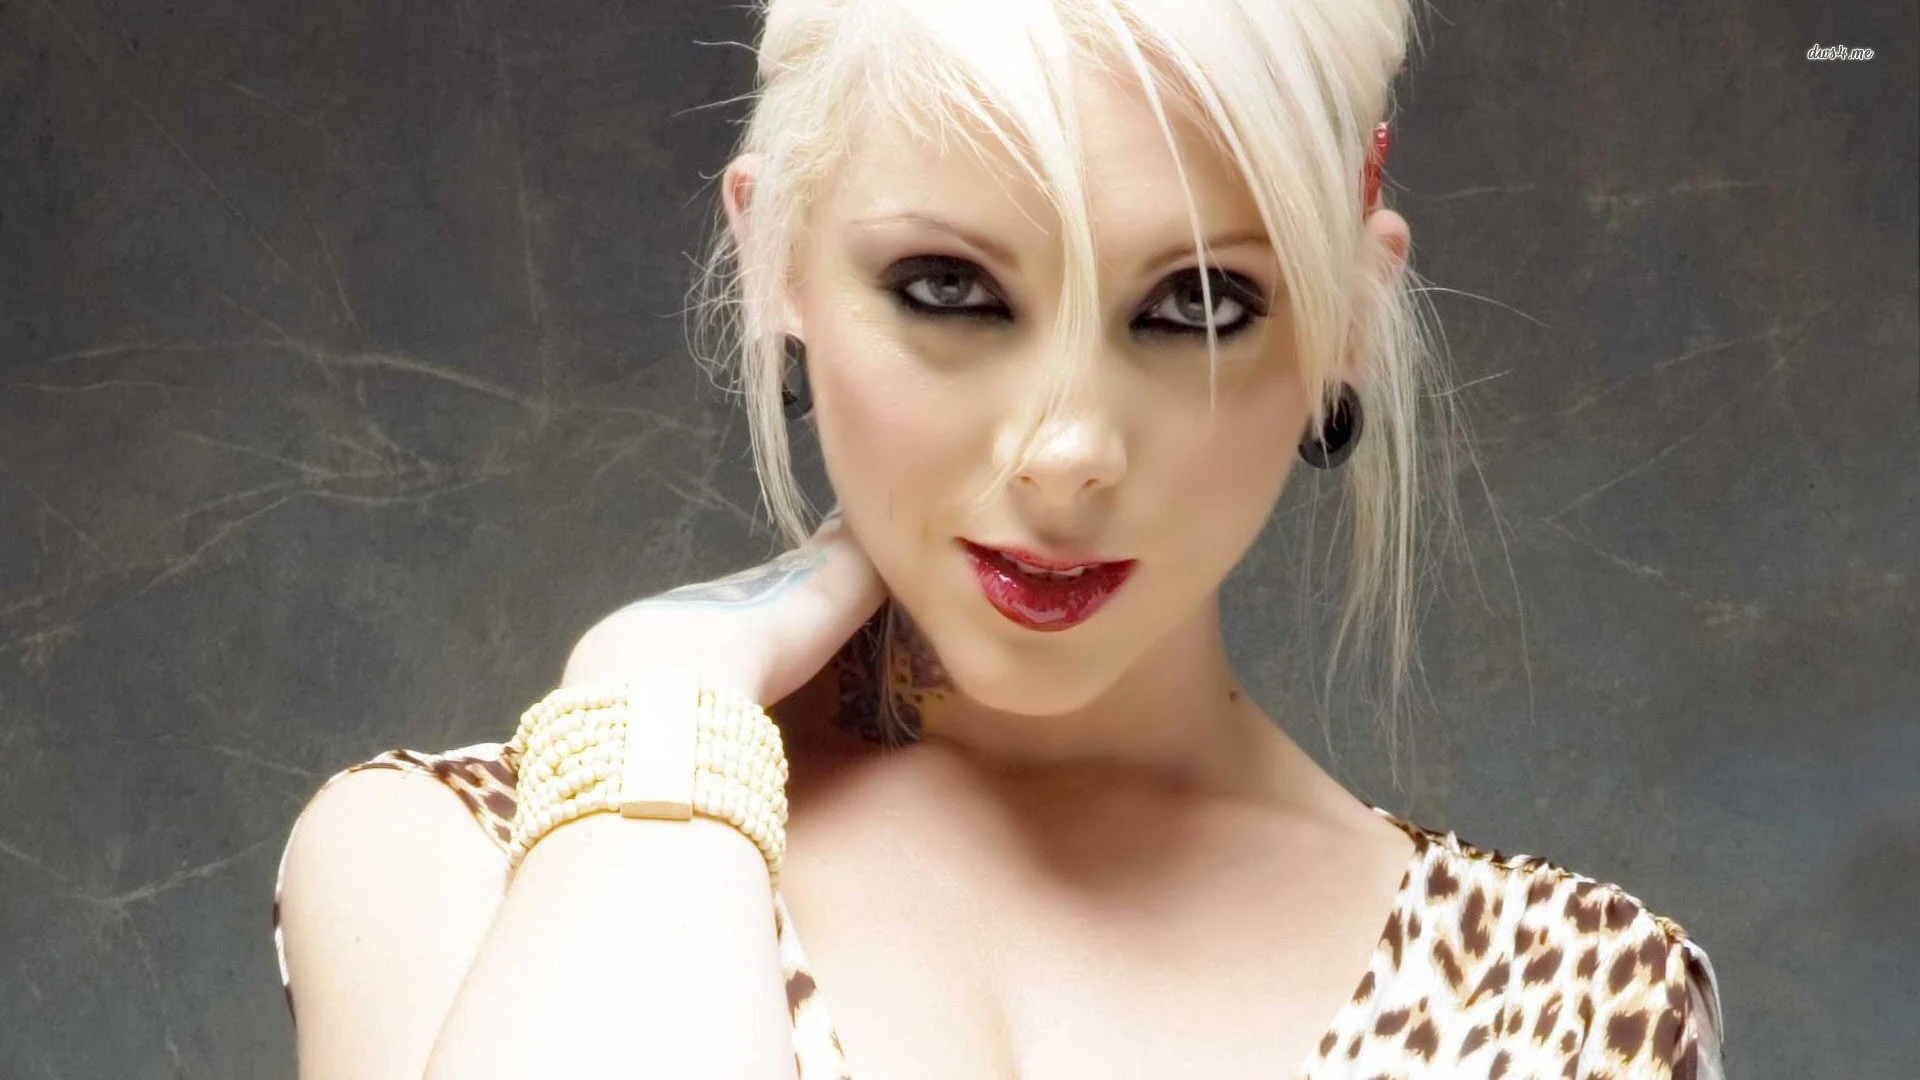 Maria Brink- lead singer of heavy metal band In This Moment. Don't